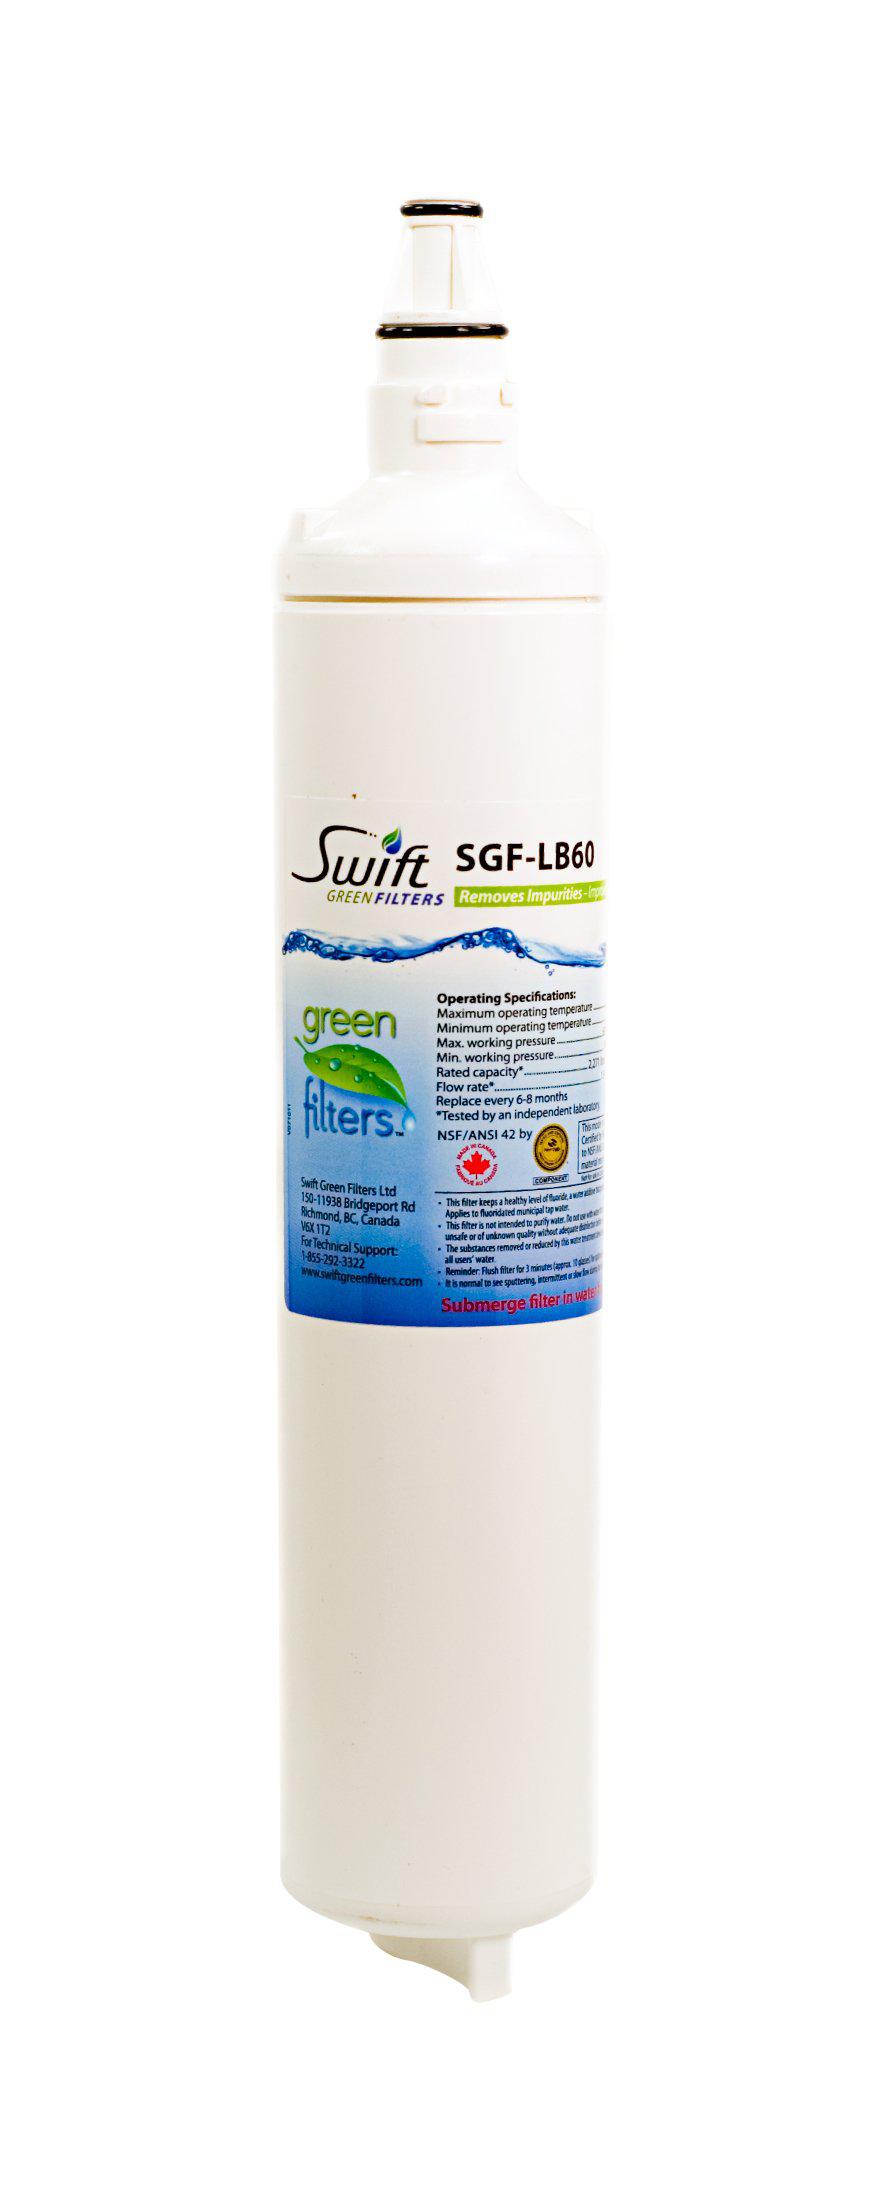 swift green filters sgf-lb60 replacement refrigerator water filter for 5231ja2006b, lt 600p, 5231ja2006a, eff-6004a, 46-9990,